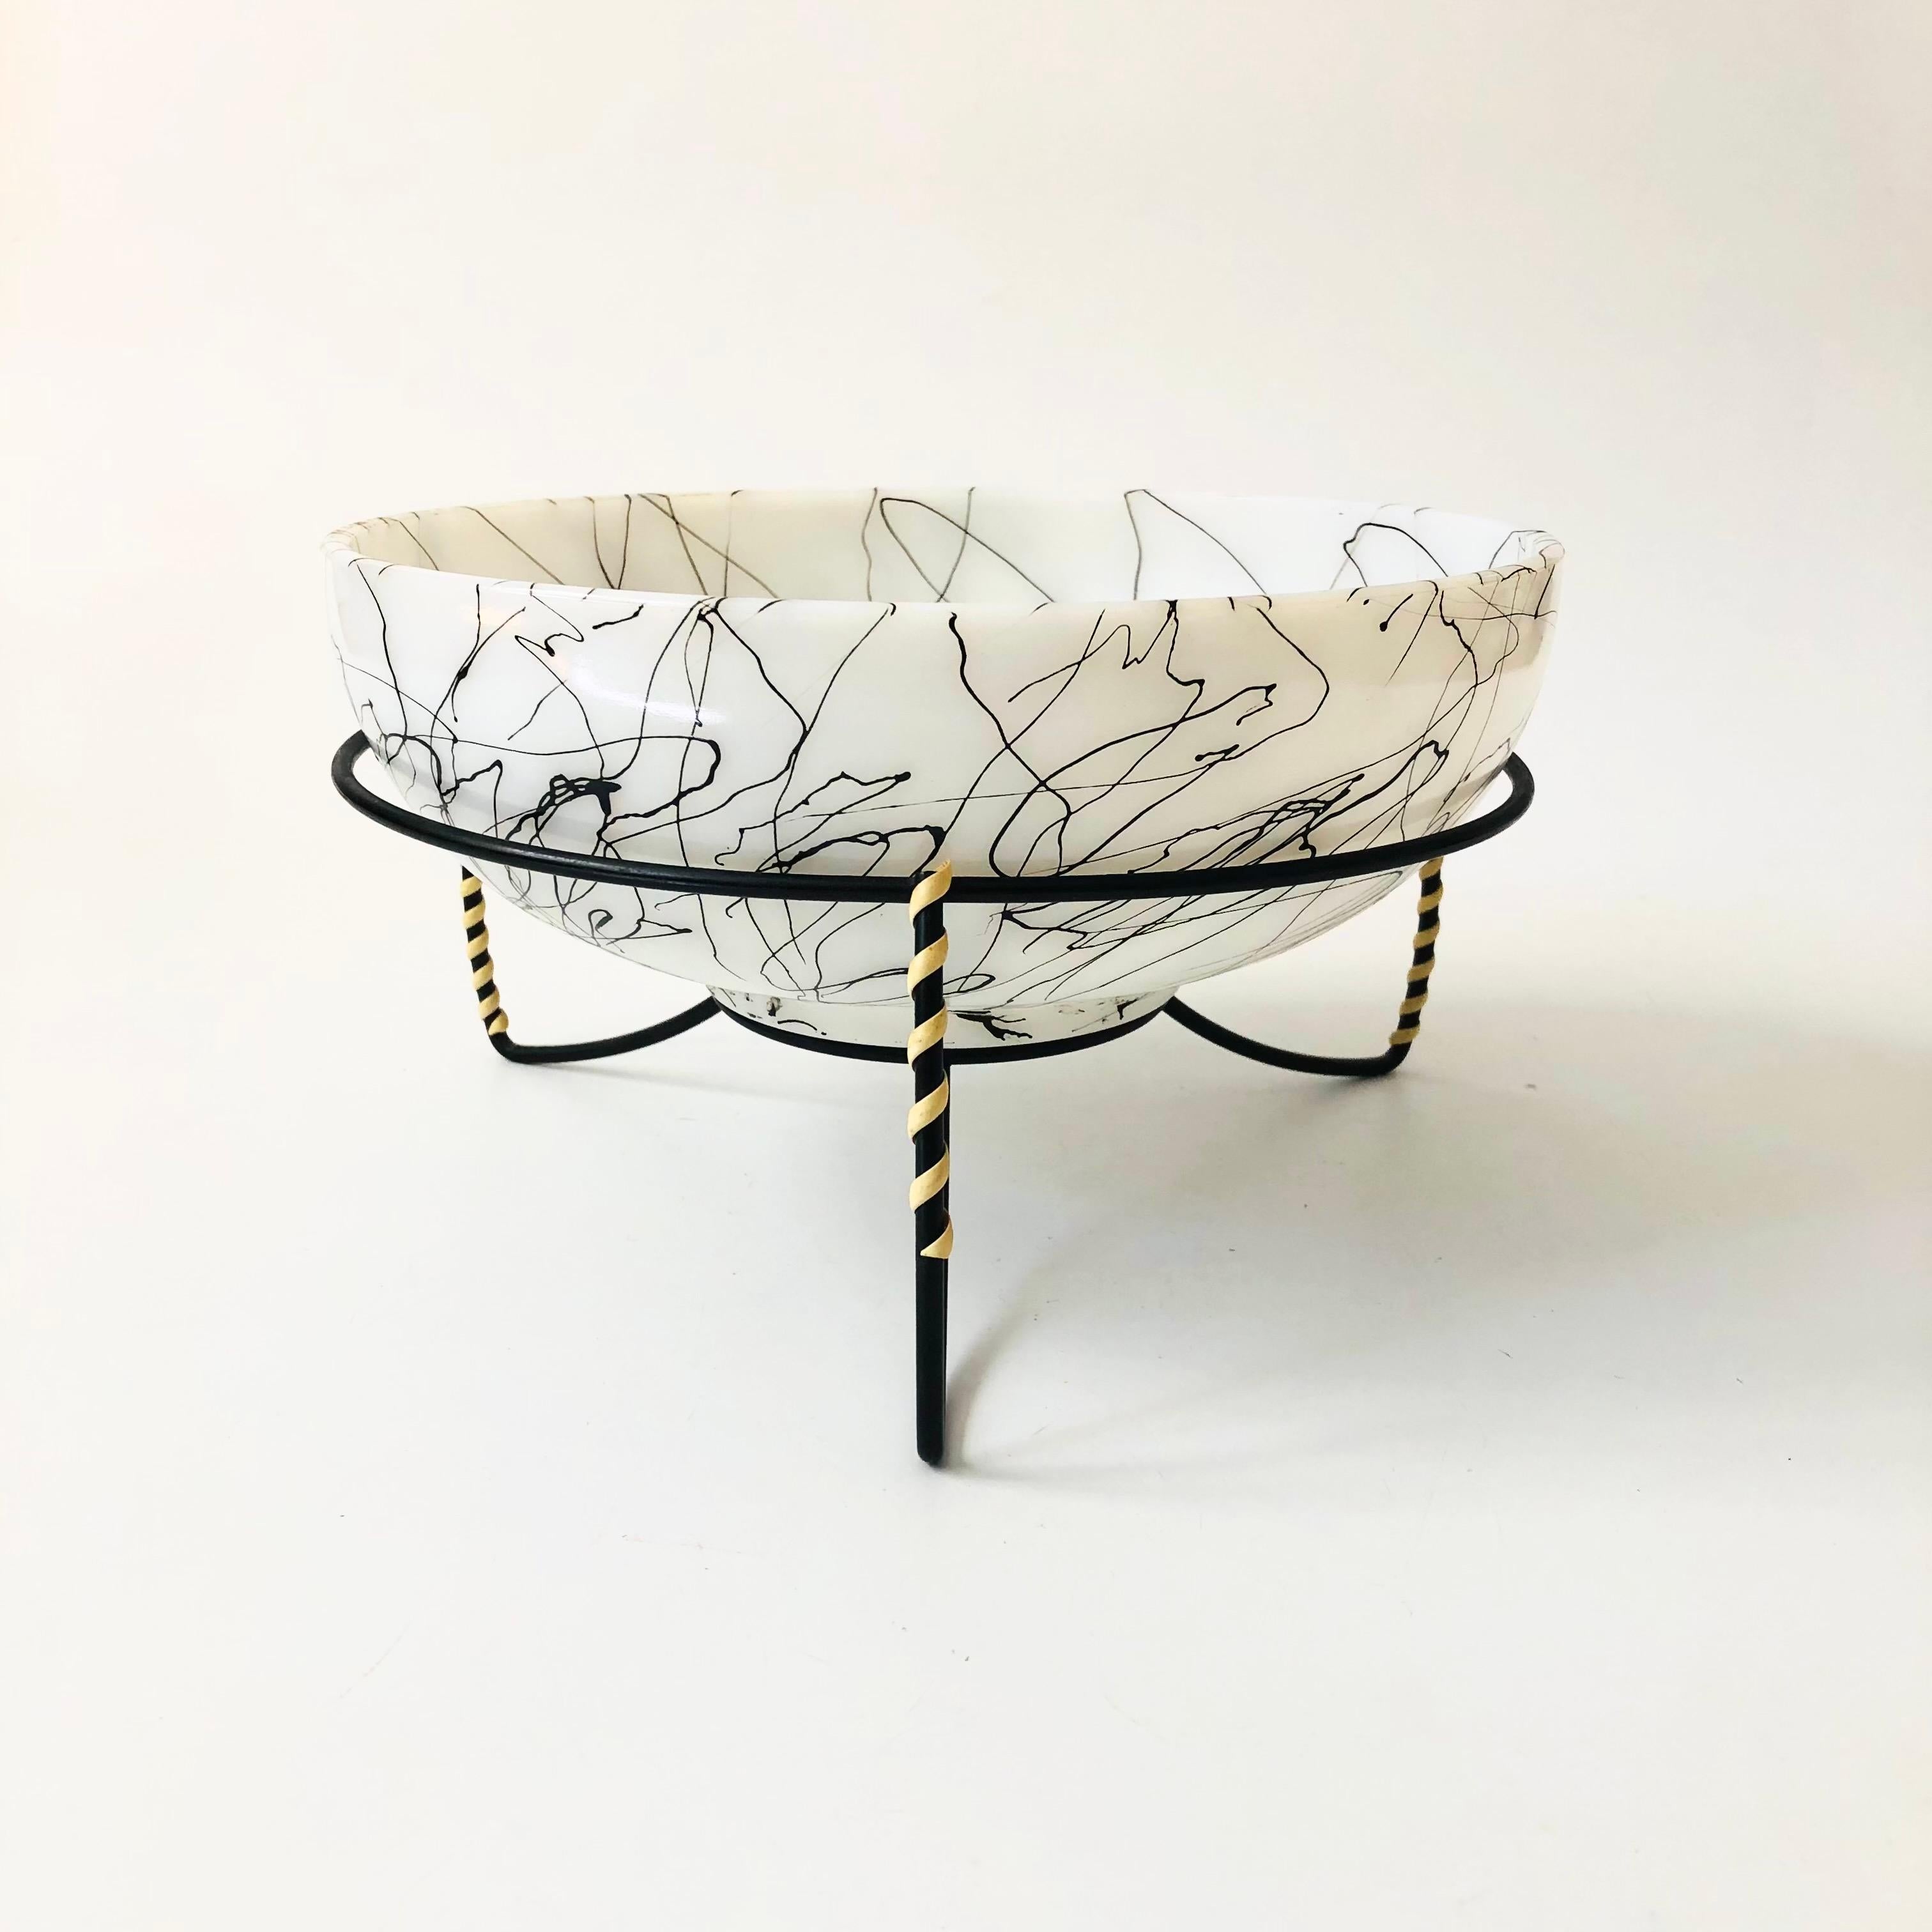 A large mid century glass salad bowl by Hazel Atlas in the spaghetti drizzle pattern. Made of white milk glass with abstract drizzle lines in black. Comes with a black metal stand with wrapped raffia detailing. A nice large serving piece perfect for